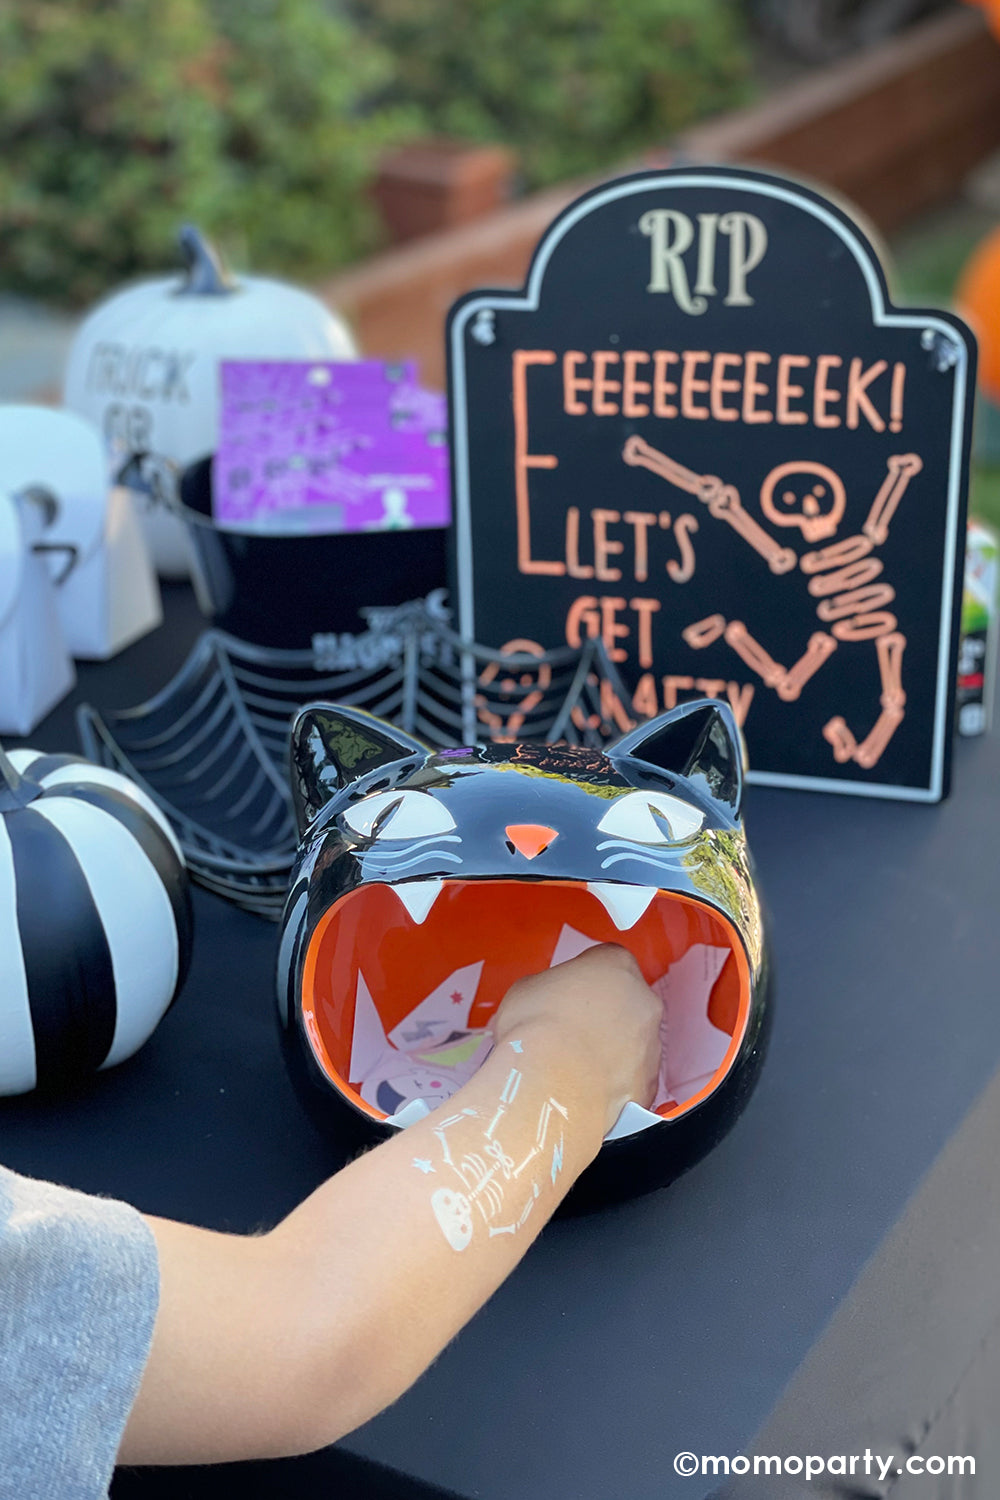 A kid's hand with Meri Meri's Halloween temporary skeleton tattoo on it, trying to grab a treat from a open-month black cat jar in a Halloween birthday party setting. A great kid-friendly Halloween party activity or trick or treat non-sugar treats idea.